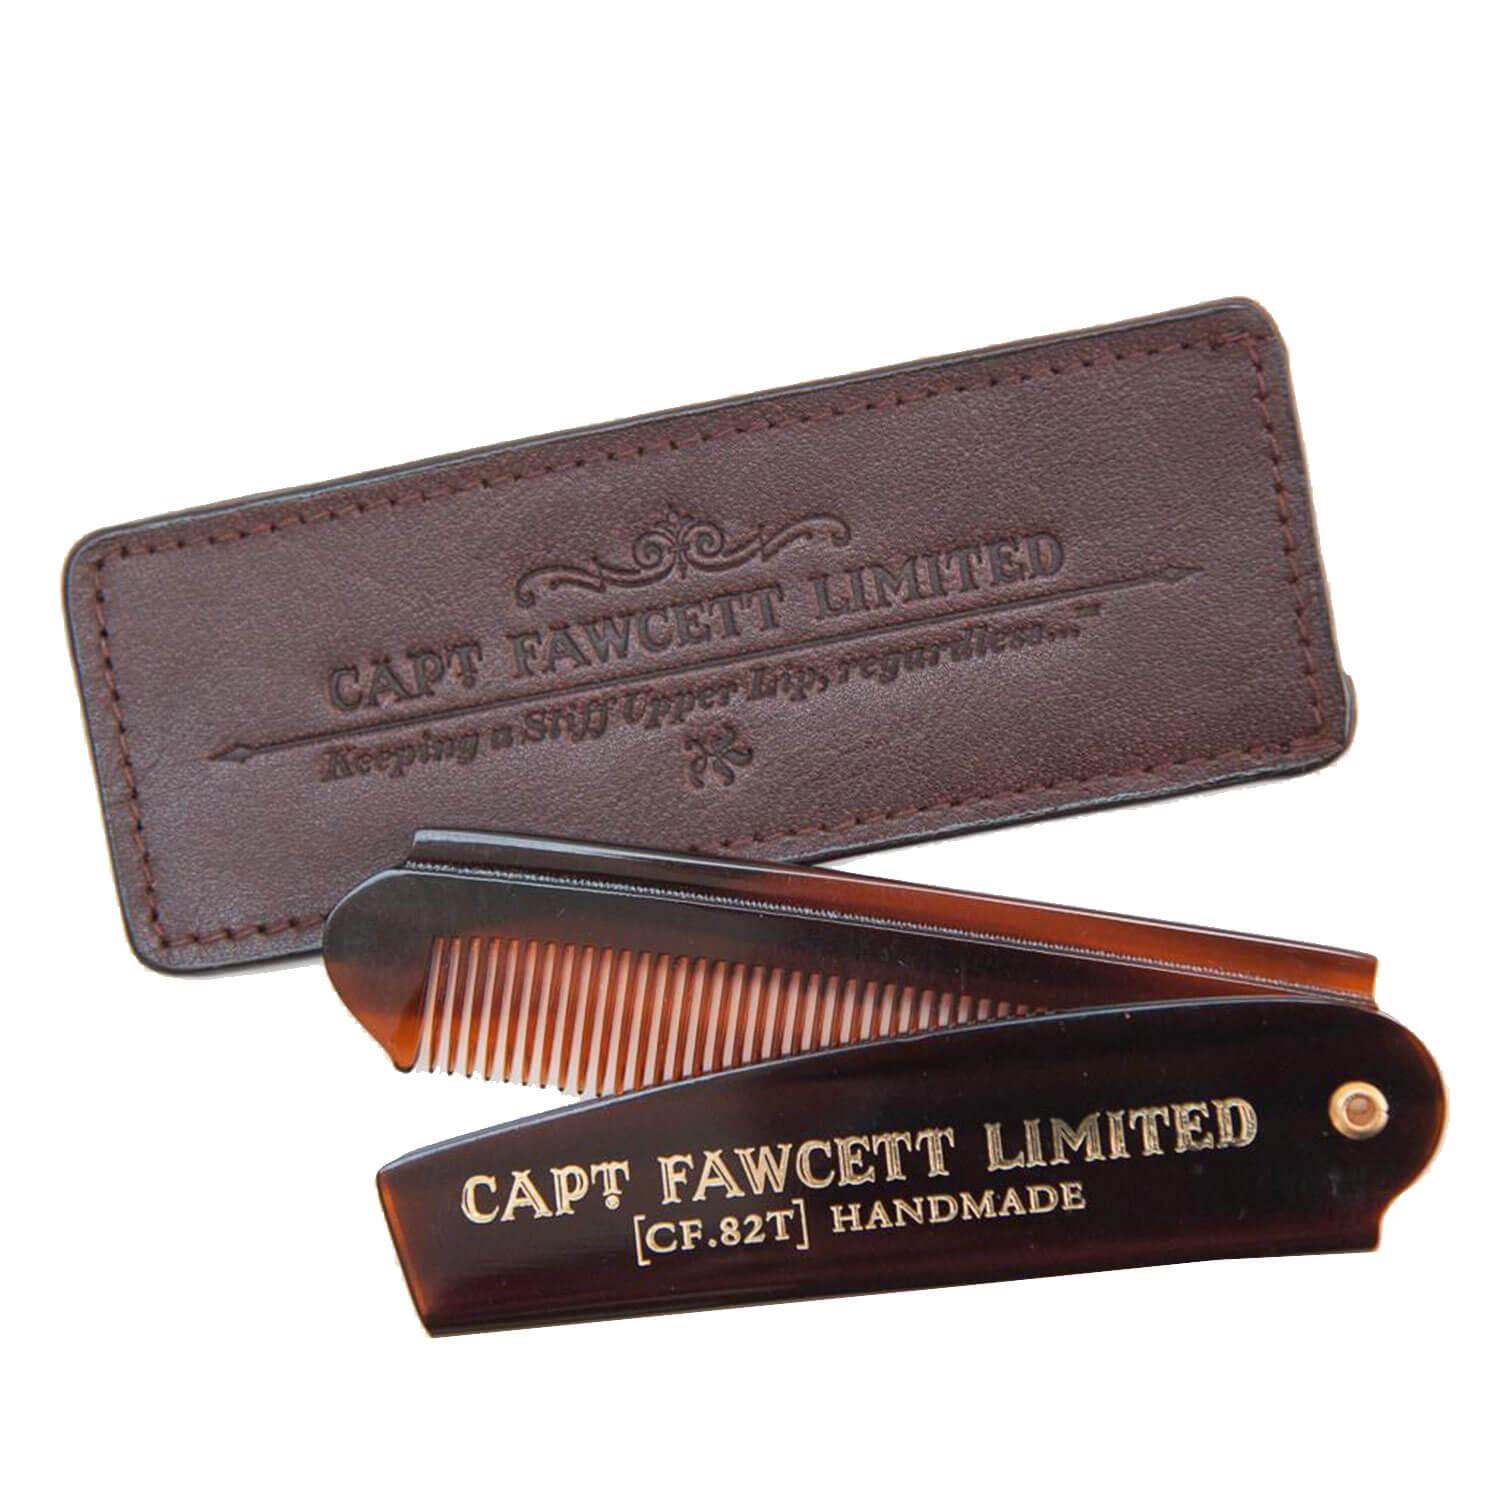 Capt. Fawcett Tools - Folding Pocket Beard Comb with Leather Case